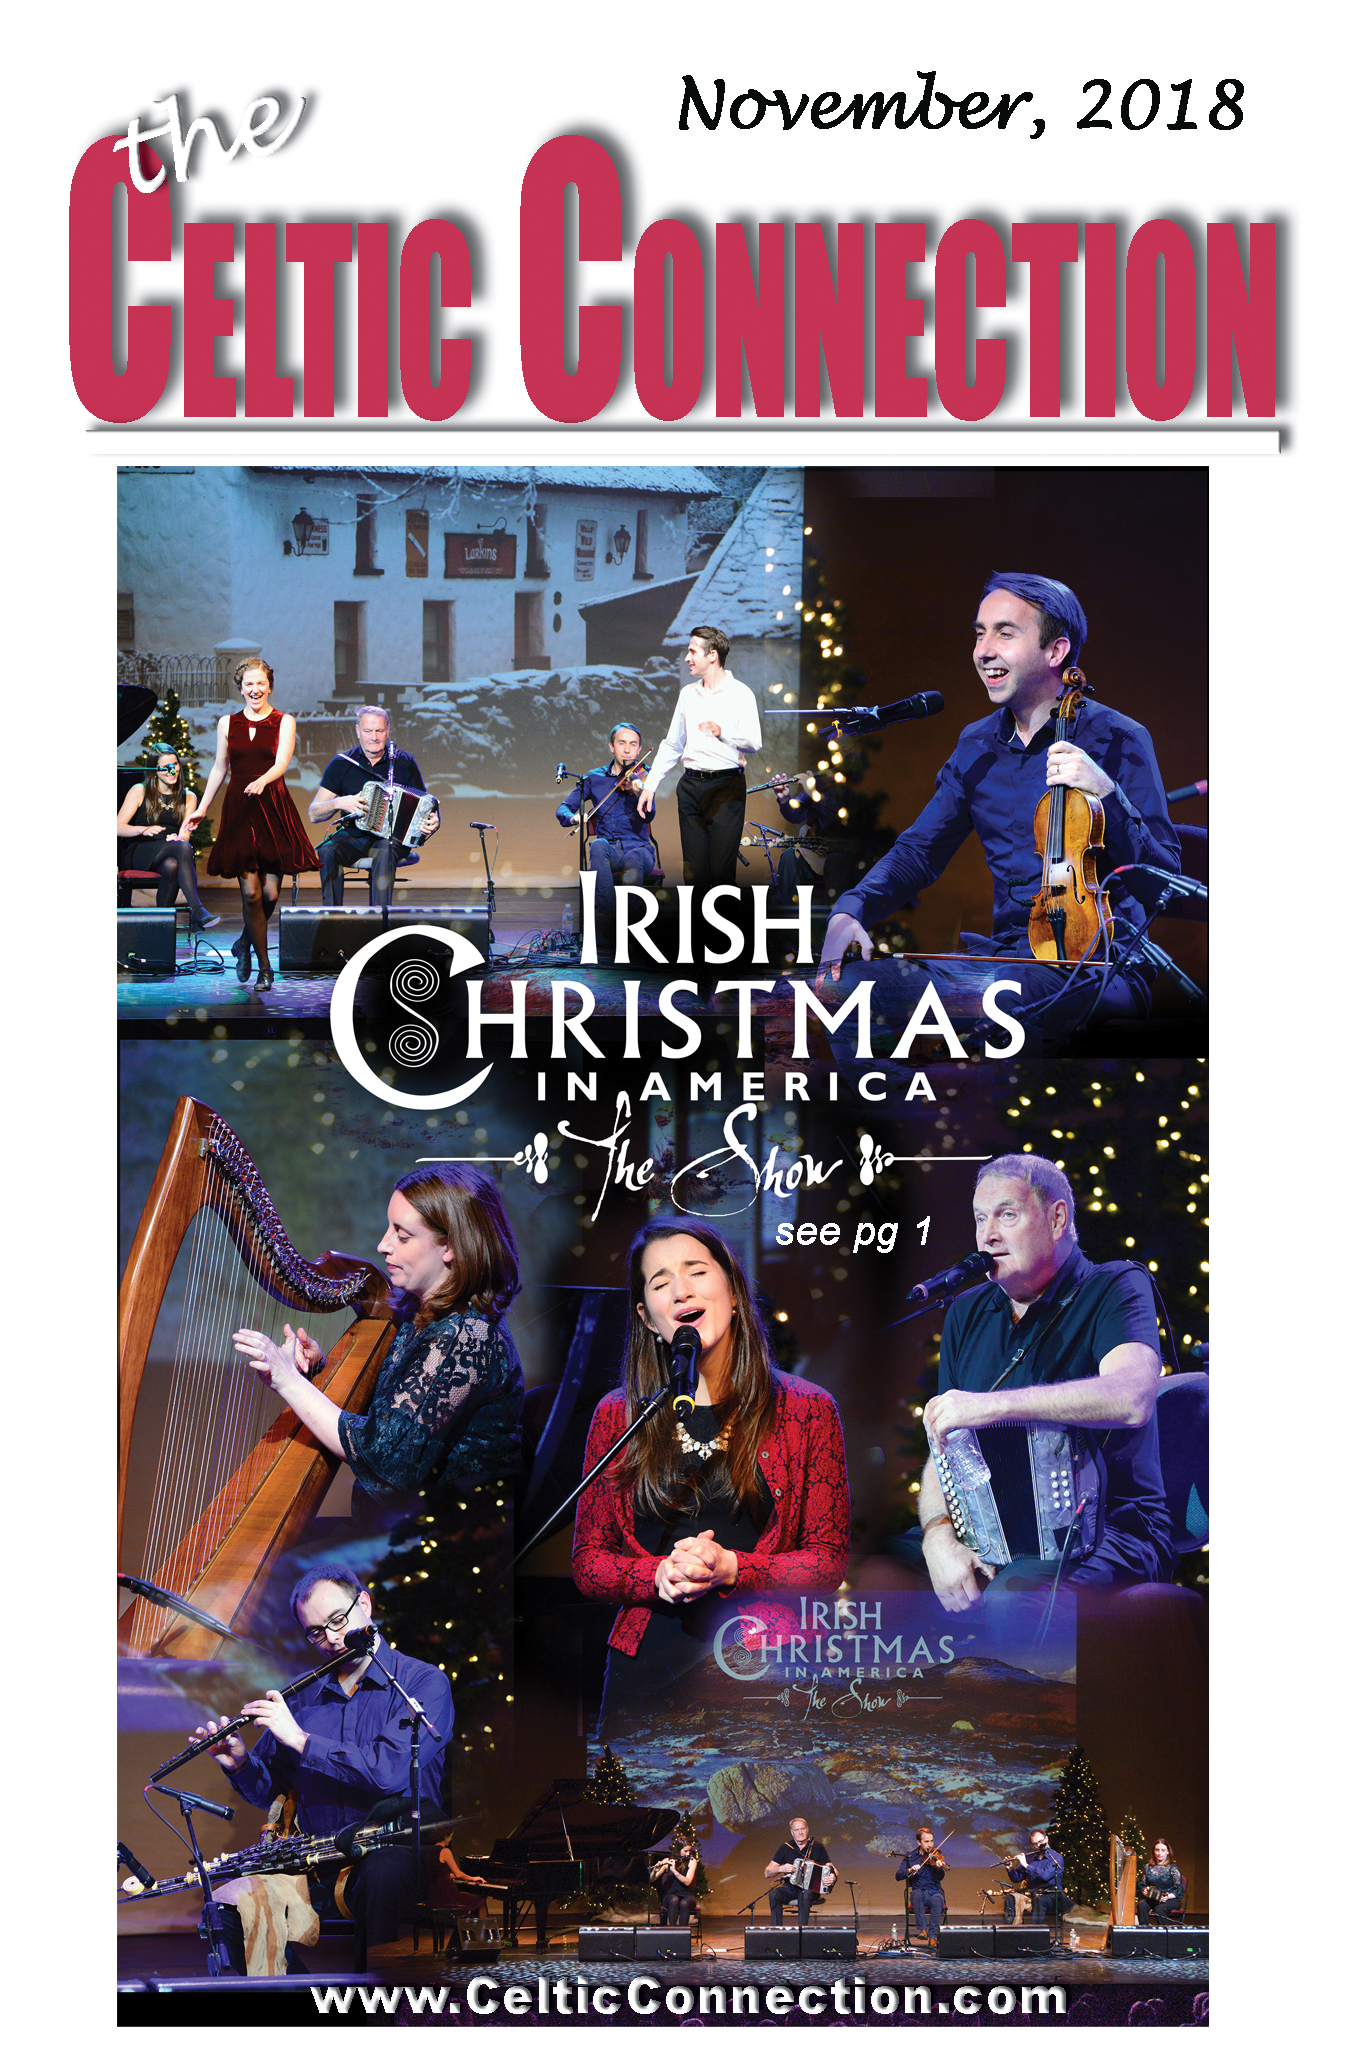 “IRISH CHRISTMAS IN AMERICA” adds second show in Denver December 9th!